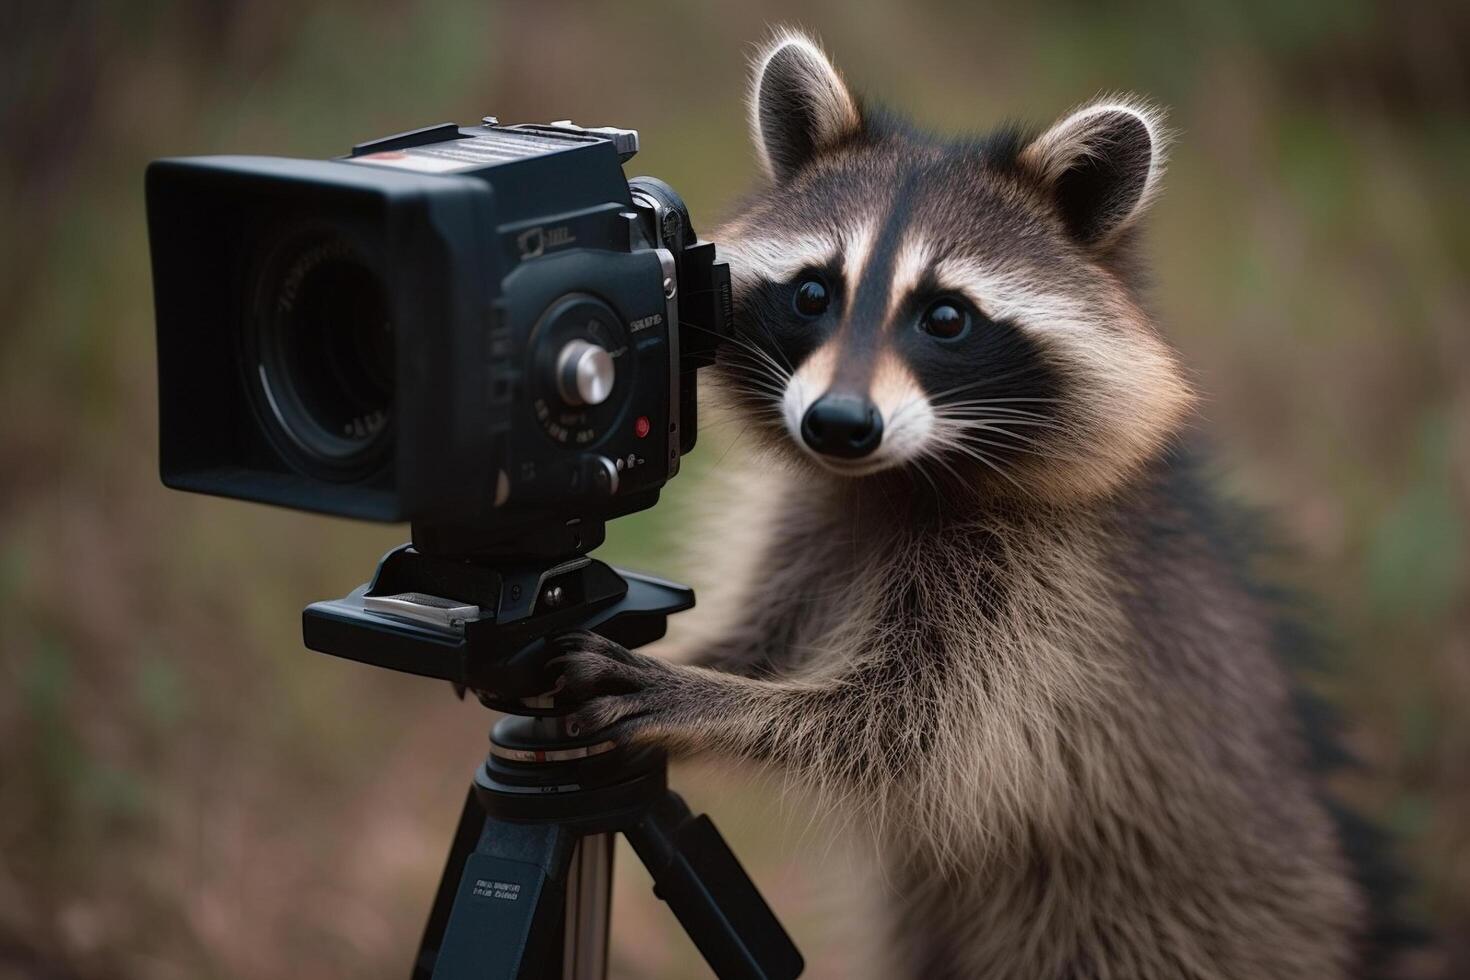 A raccoon using a camera in front of a blurry background, photo